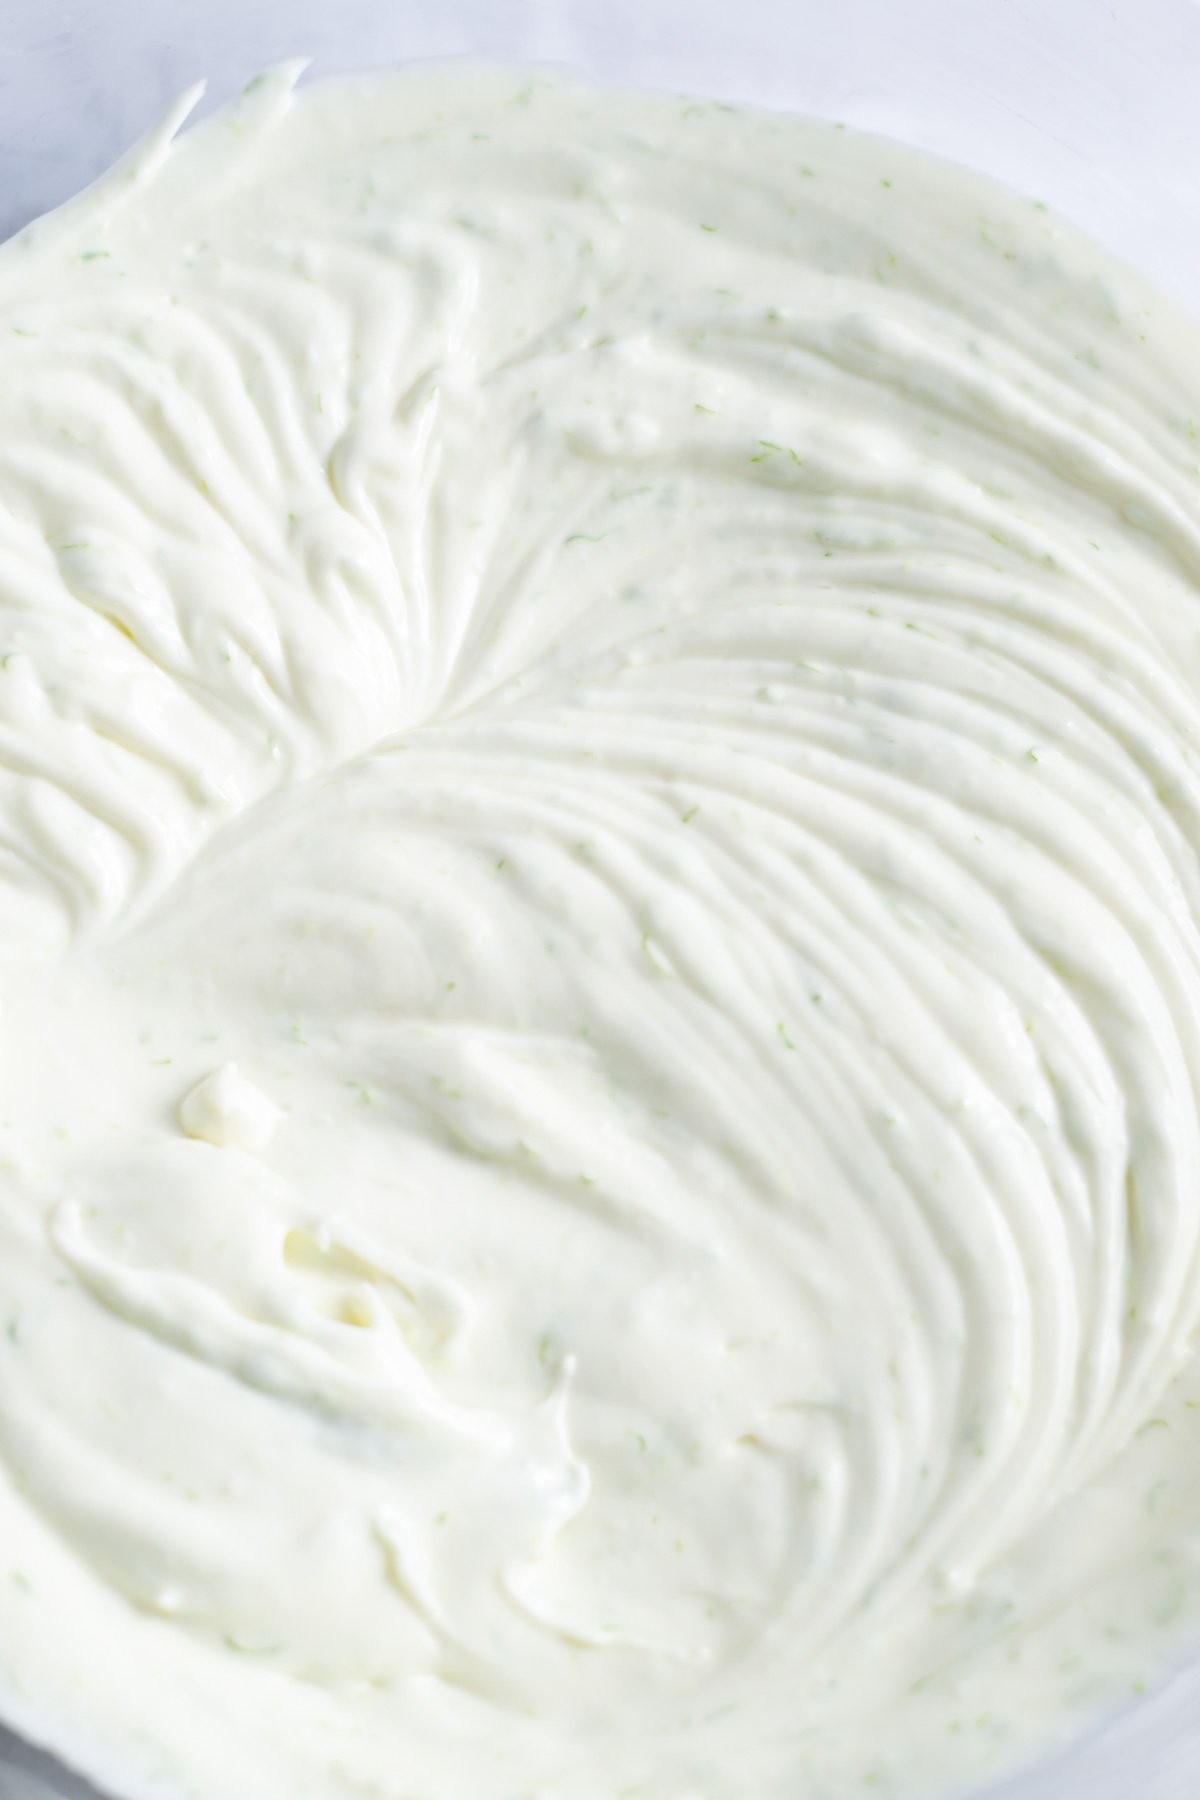 cream cheese, sugar, lime juice and zest mixed together in a bowl